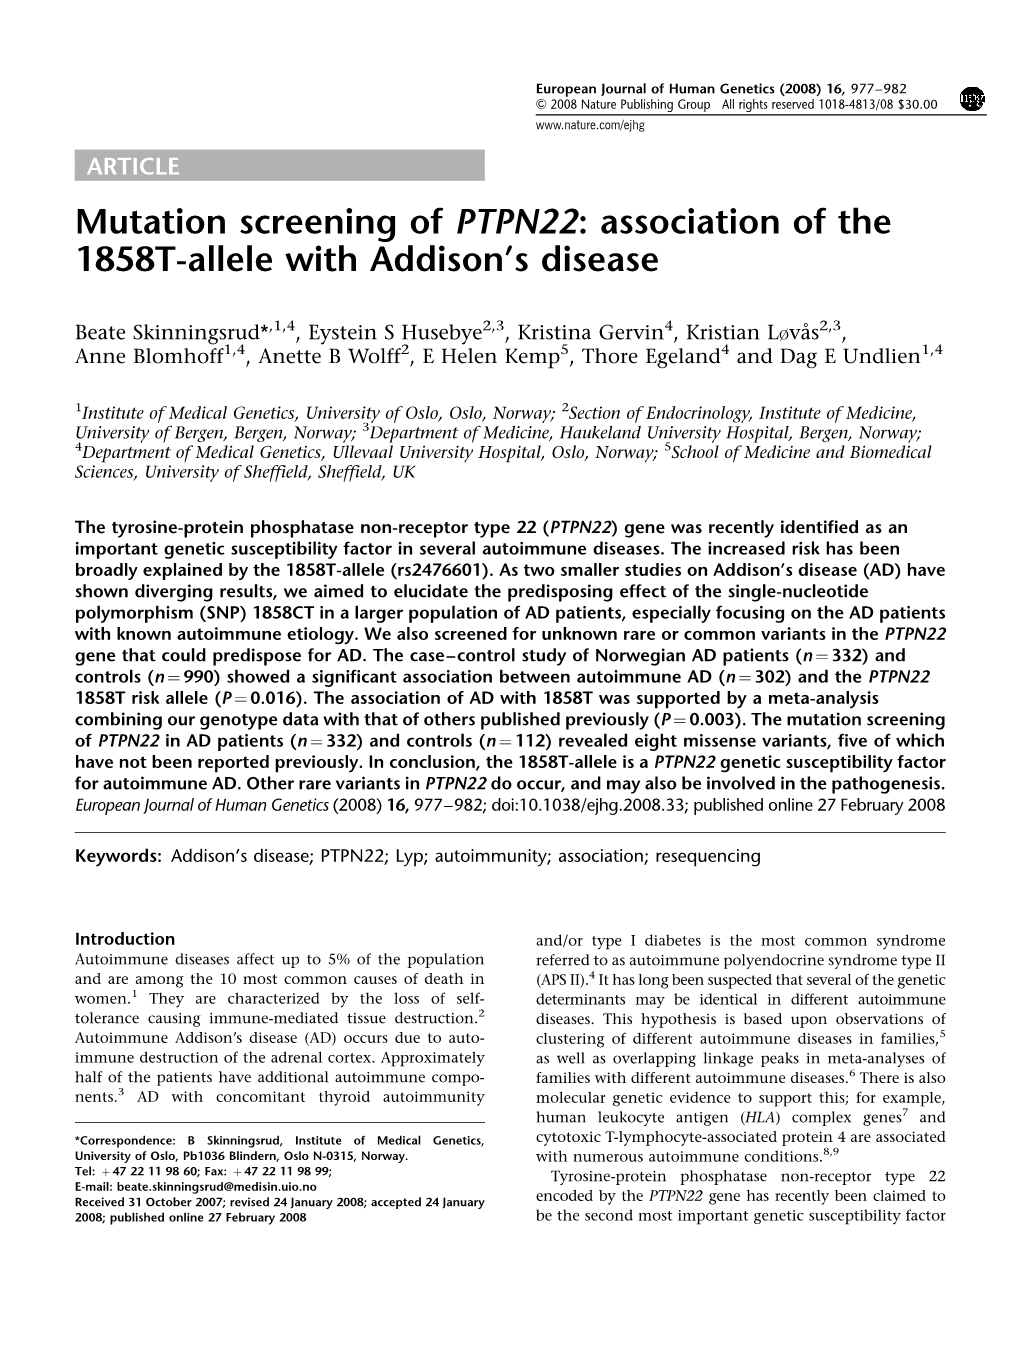 Mutation Screening of PTPN22: Association of the 1858T-Allele with Addison’S Disease